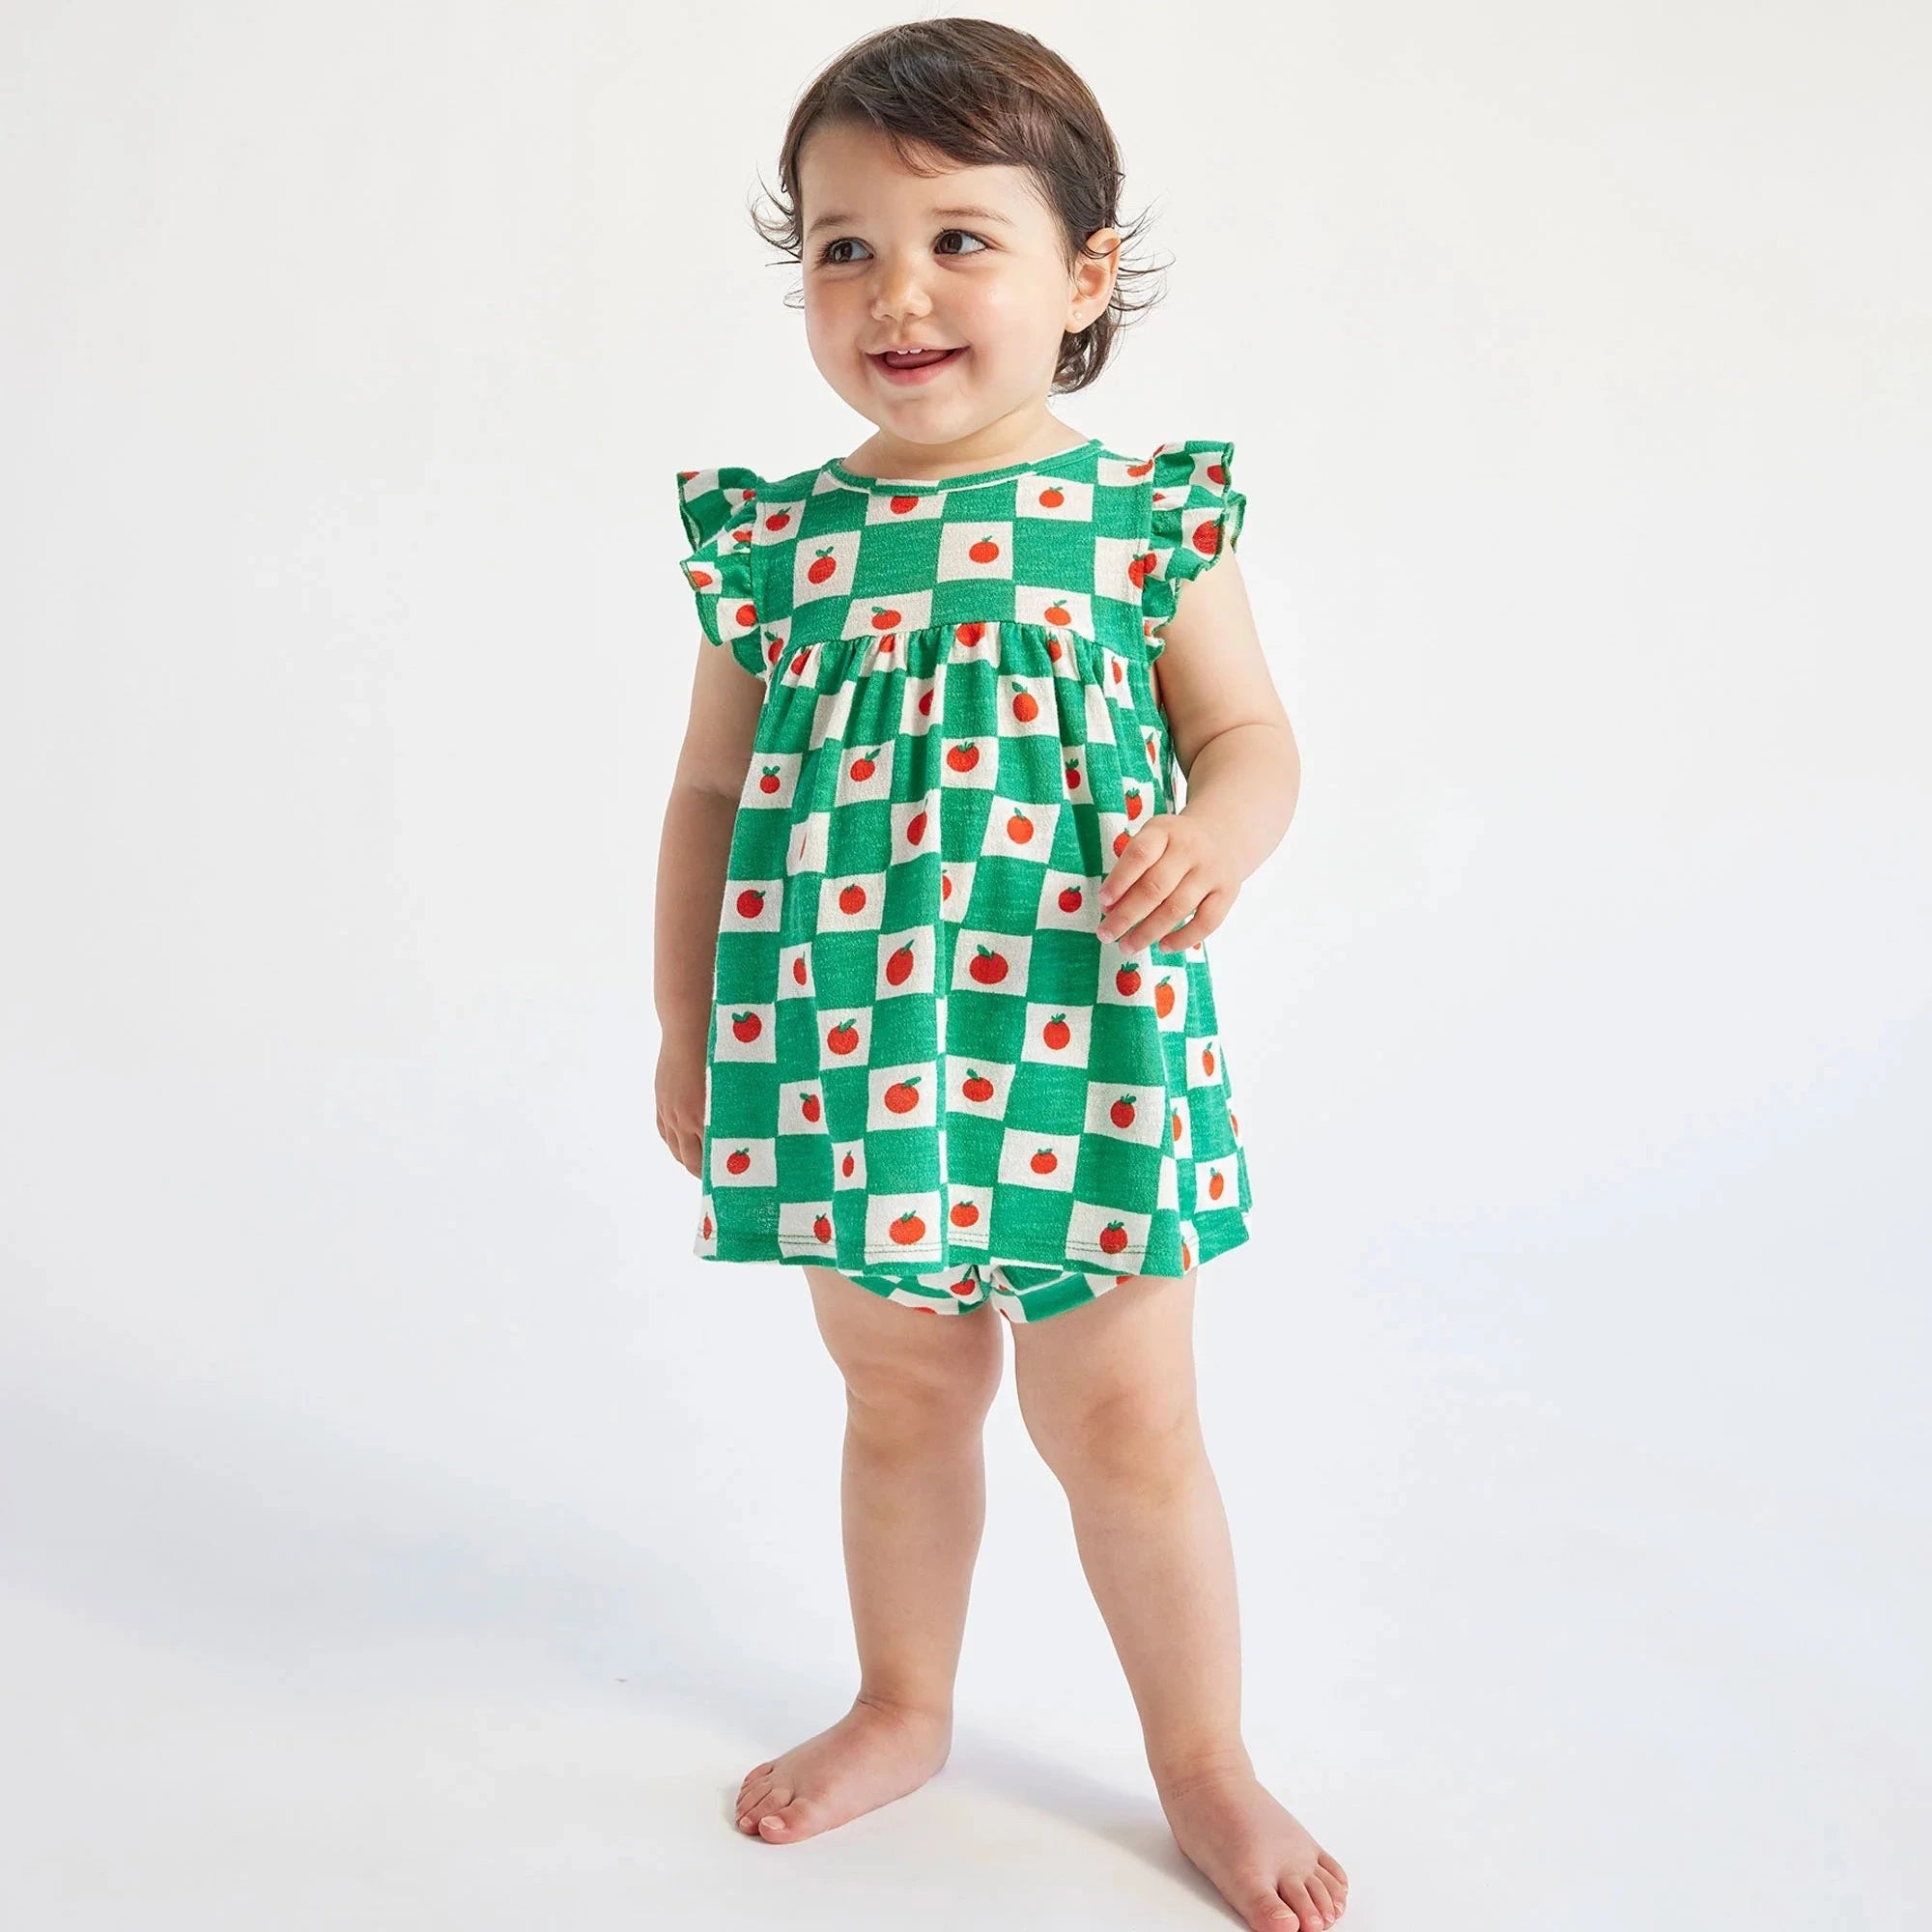 child stand gin green and white checked print with little red tomatoes dress